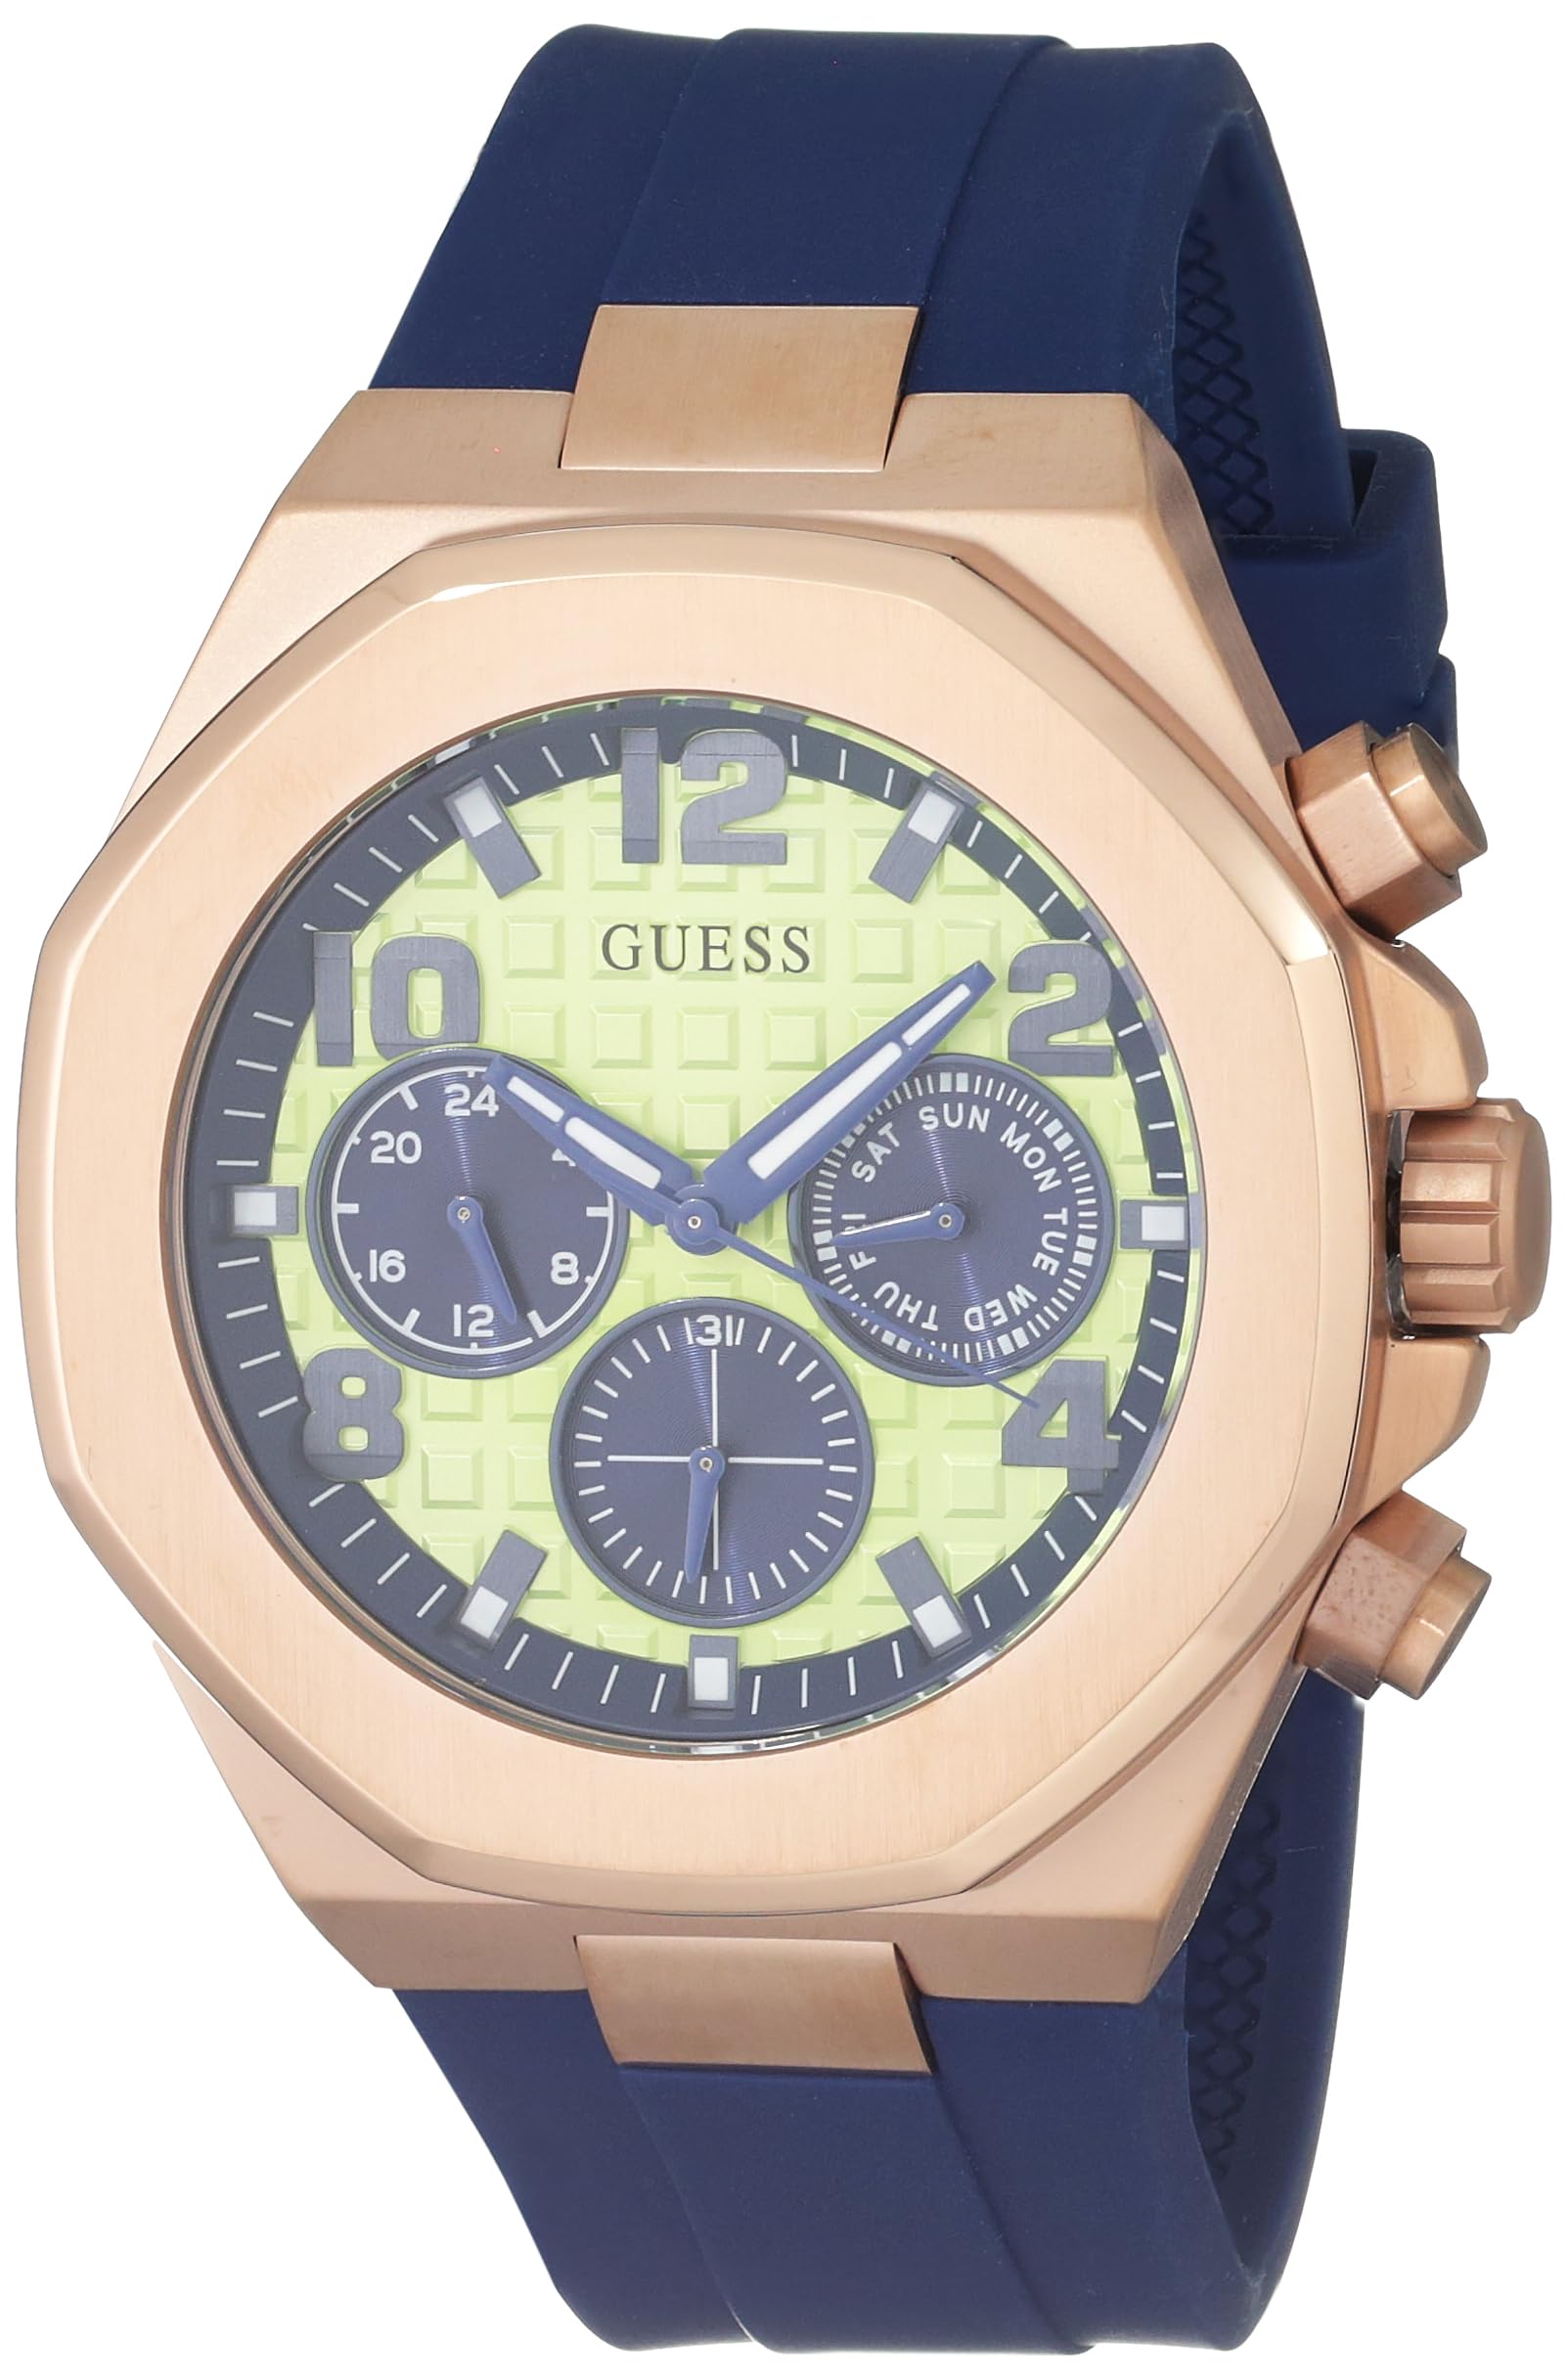 GUESS Men's 46mm Watch - Blue Strap Lime Green Dial Rose Gold Tone Case